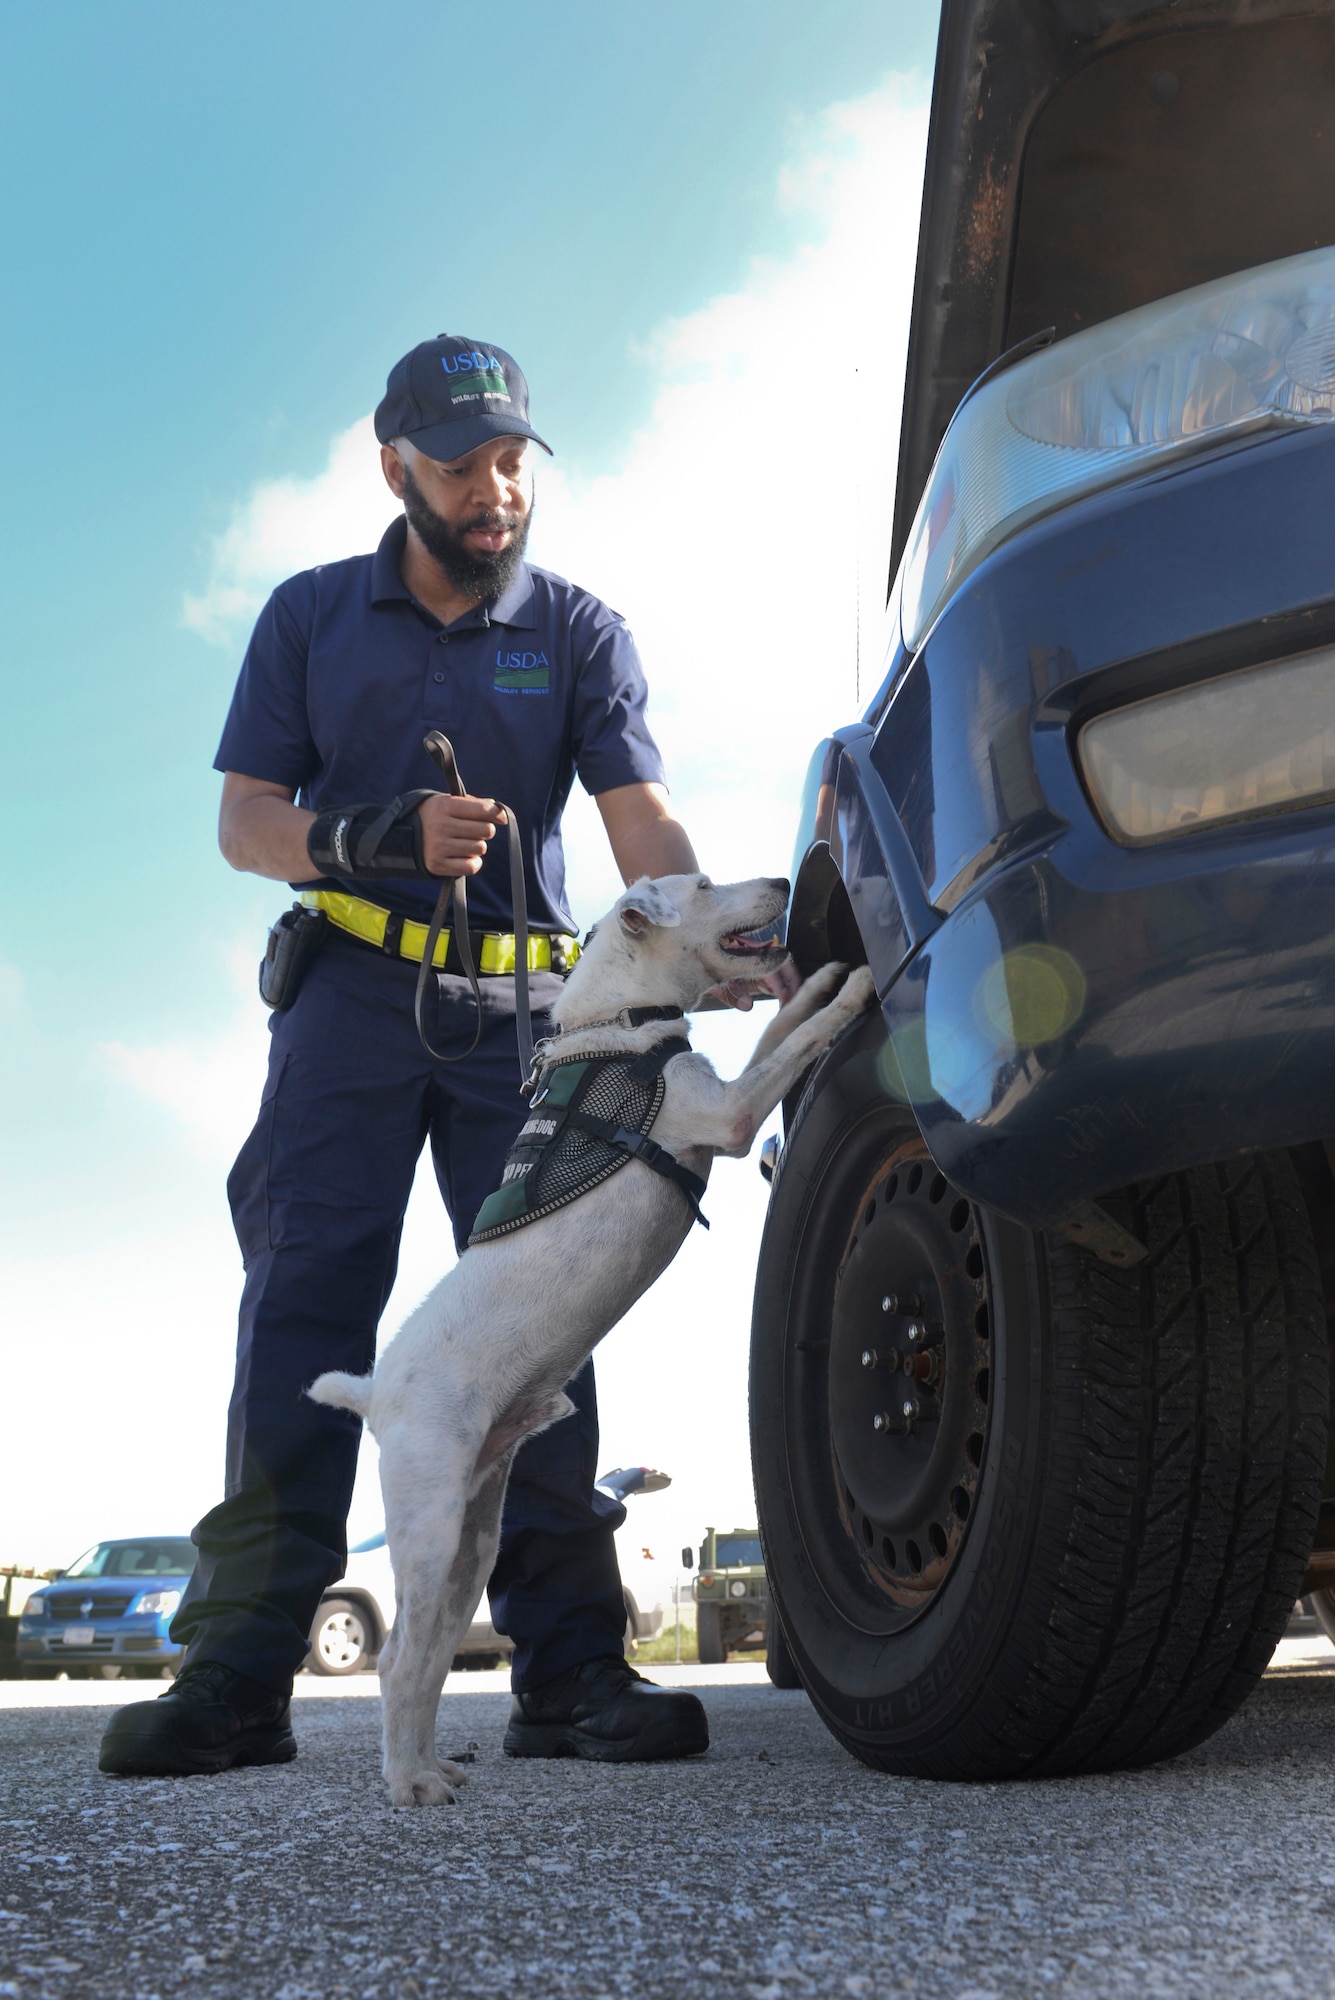 Tony Thompson, a U.S. Department of Agriculture brown tree snake detector dog handler, and Striker, a USDA brown tree snake detector dog, inspect a vehicle during a training session April 30, 2015, at Andersen Air Force Base, Guam. All USDA snake detector dogs are acquired from various rescue shelters in the Atlanta area and are selected based on temperament, willingness to work and prey drive. (U.S. Air Force photo/Senior Airman Katrina M. Brisbin)